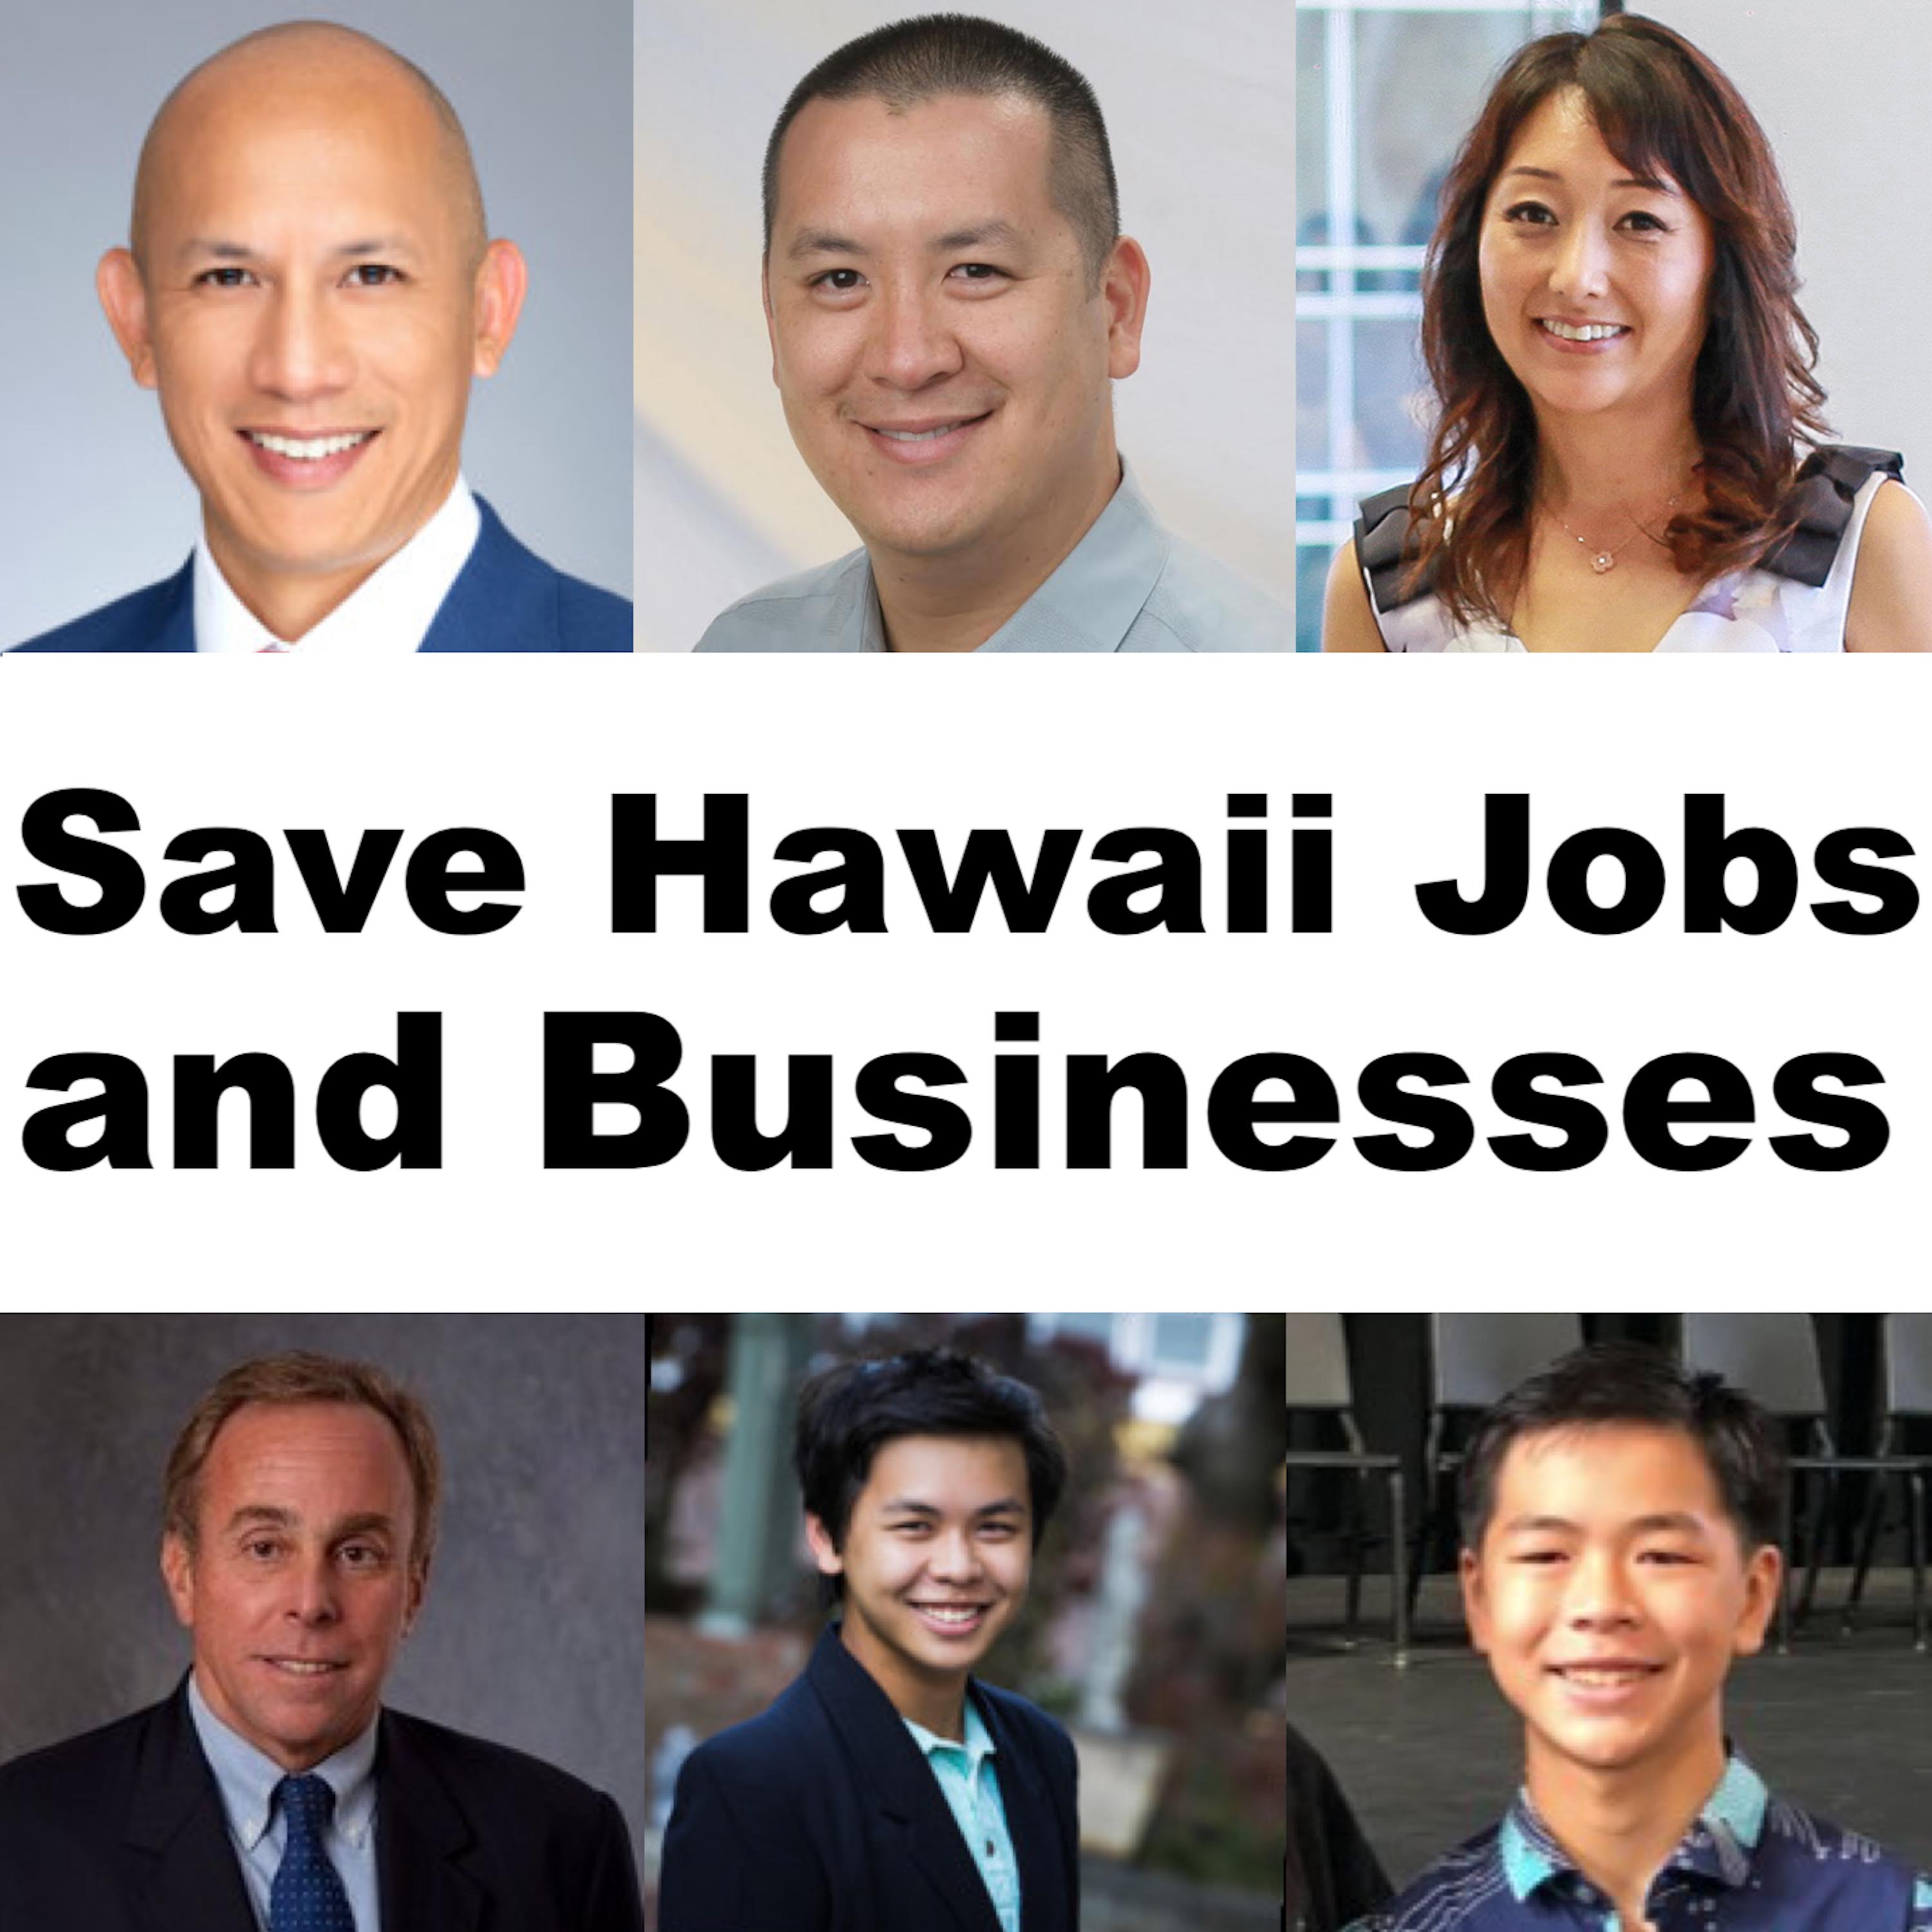 Save Hawaii Jobs and Businesses